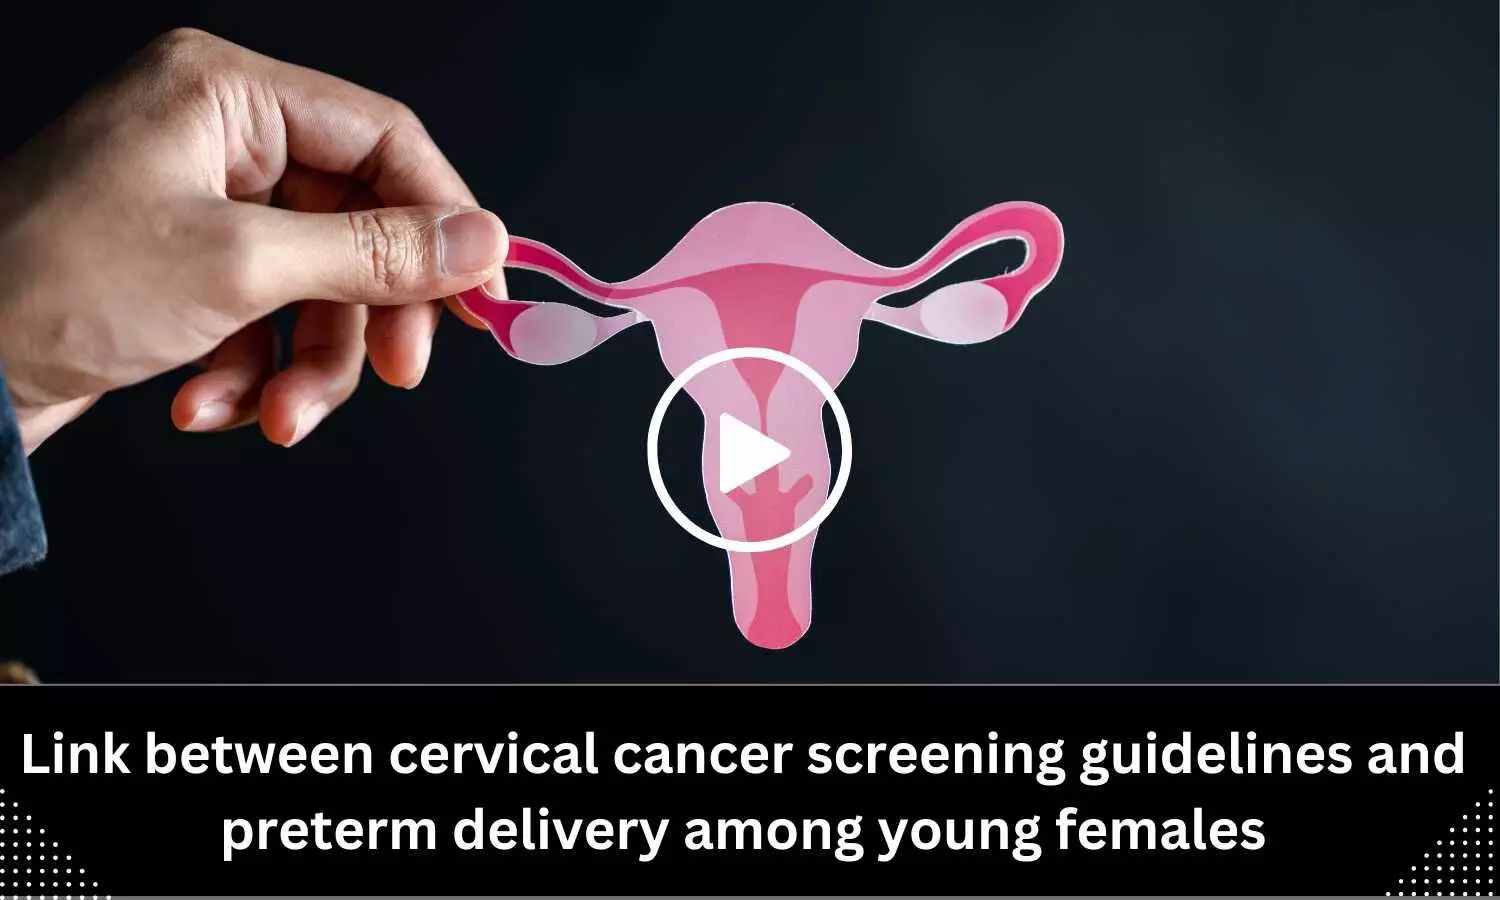 Link between cervical cancer screening guidelines and preterm delivery among young females